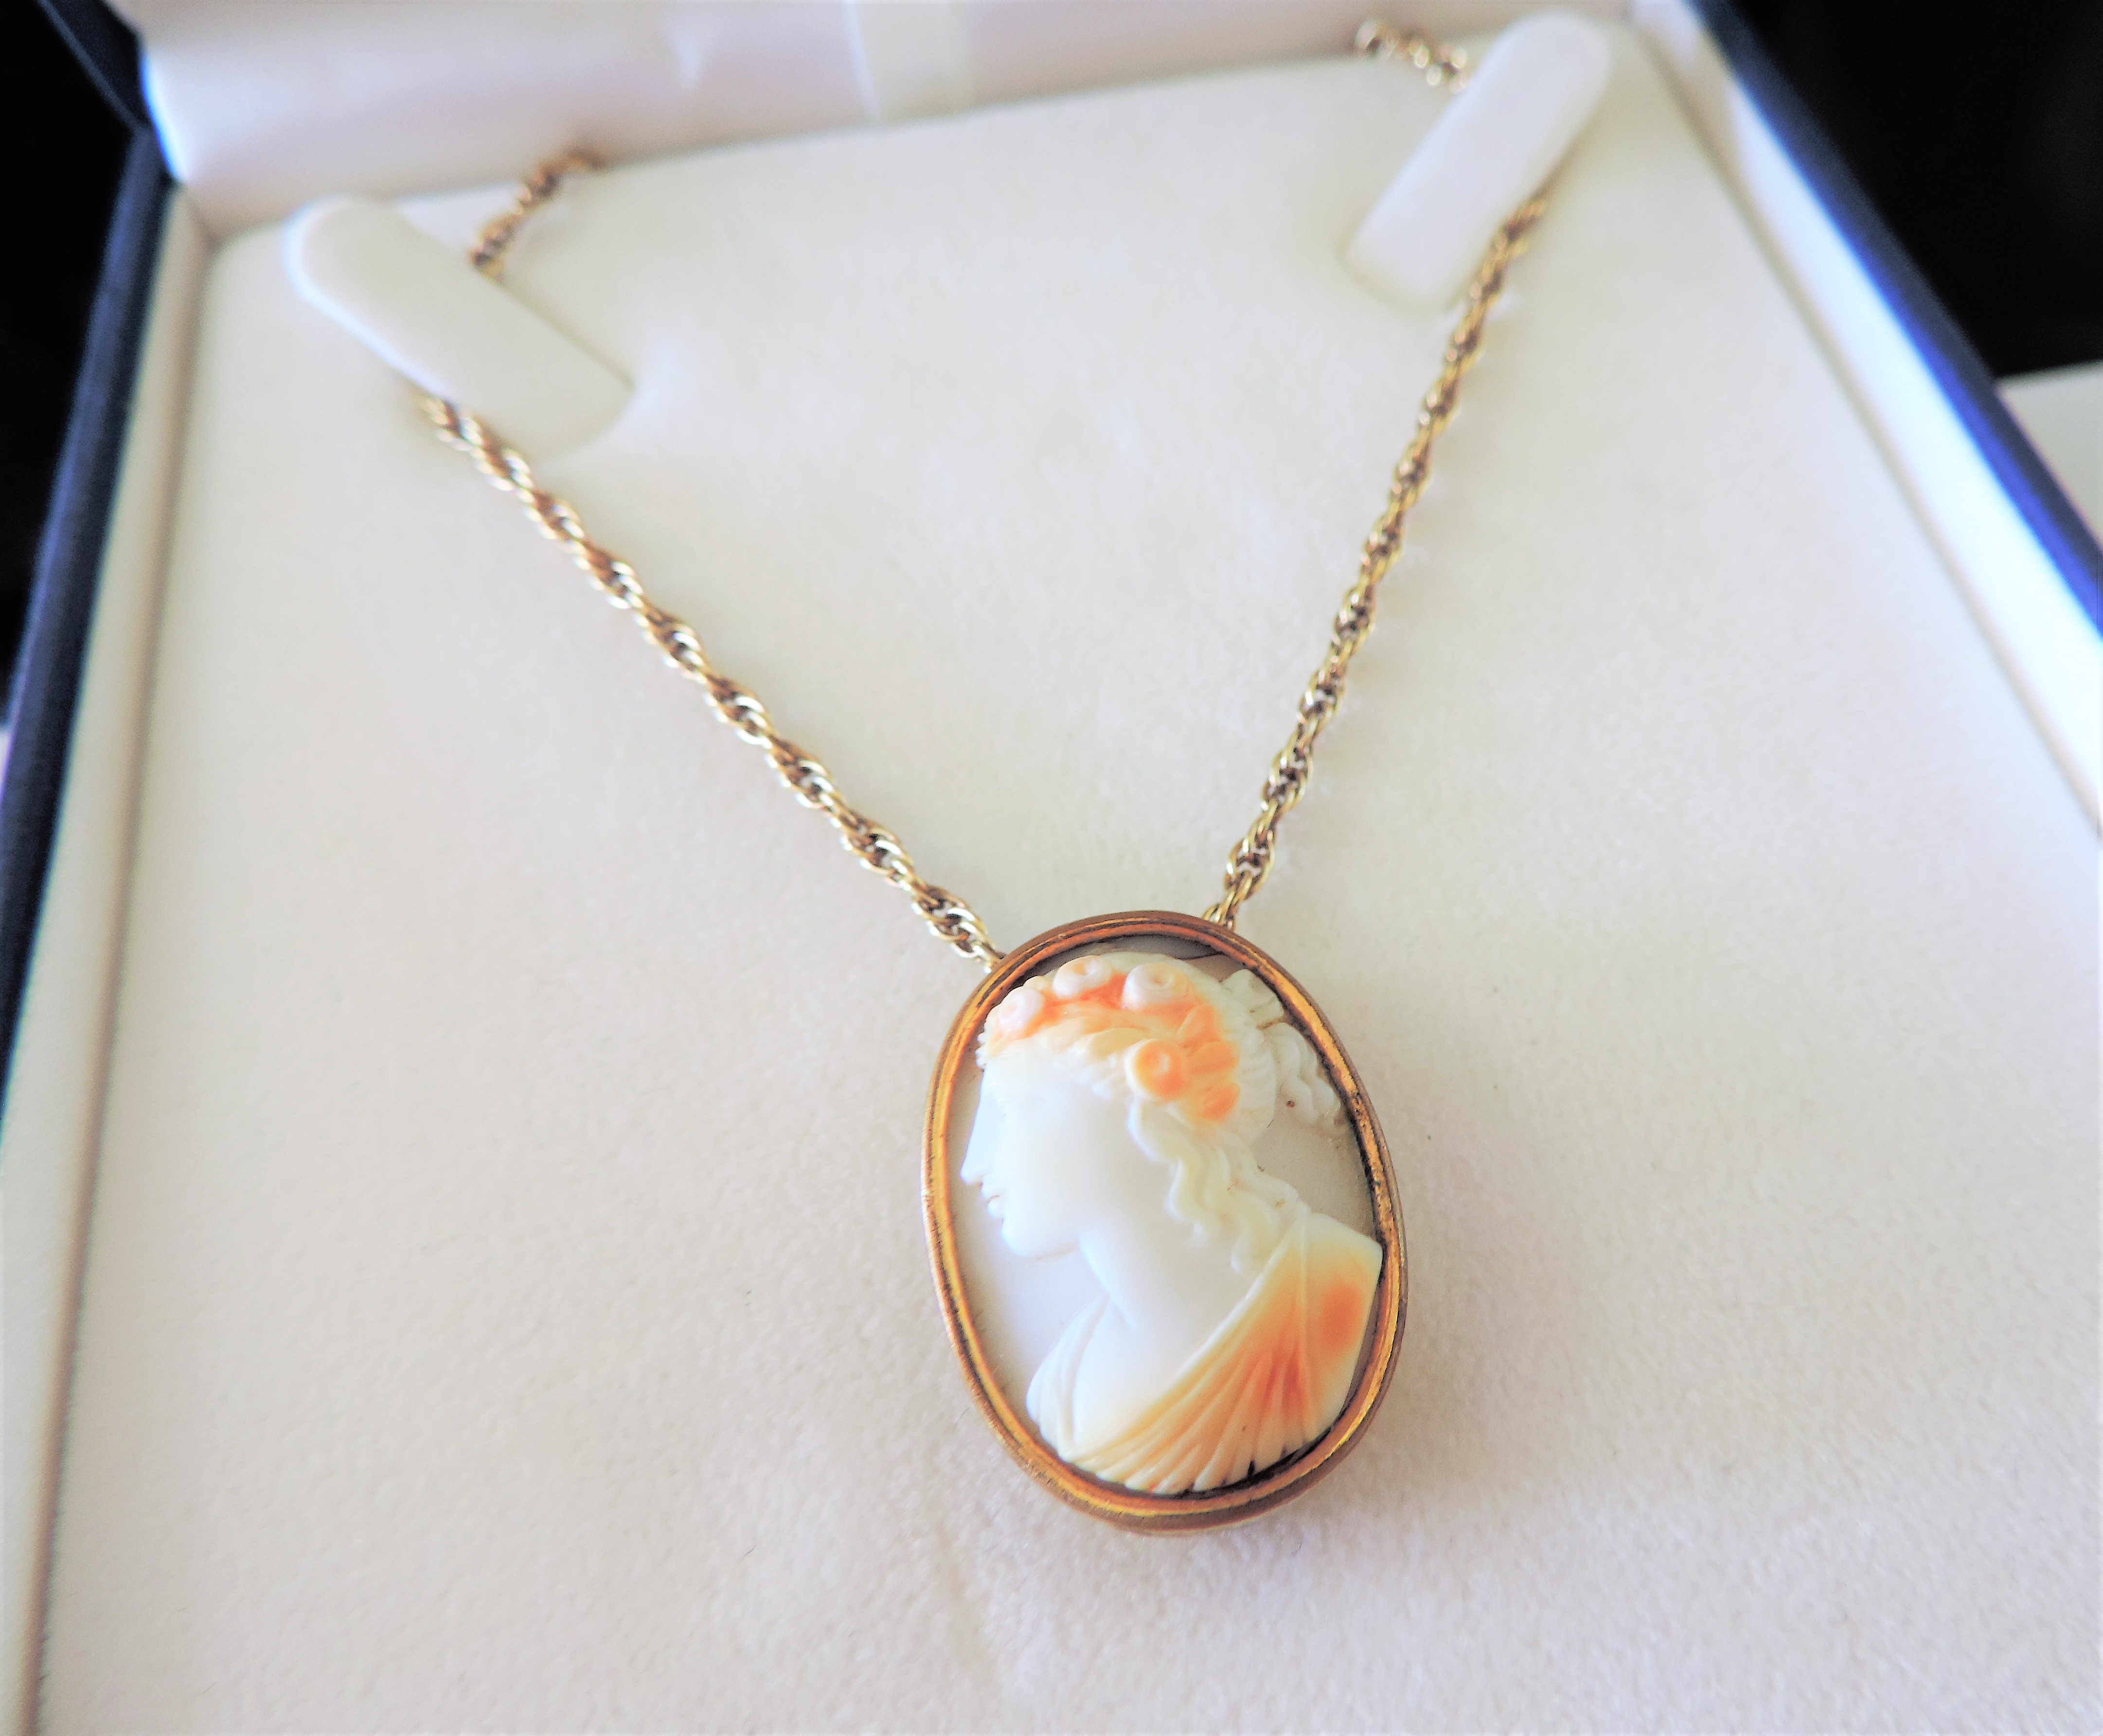 Antique Cameo Pendant Necklace Gold on Silver Chain - Image 3 of 3